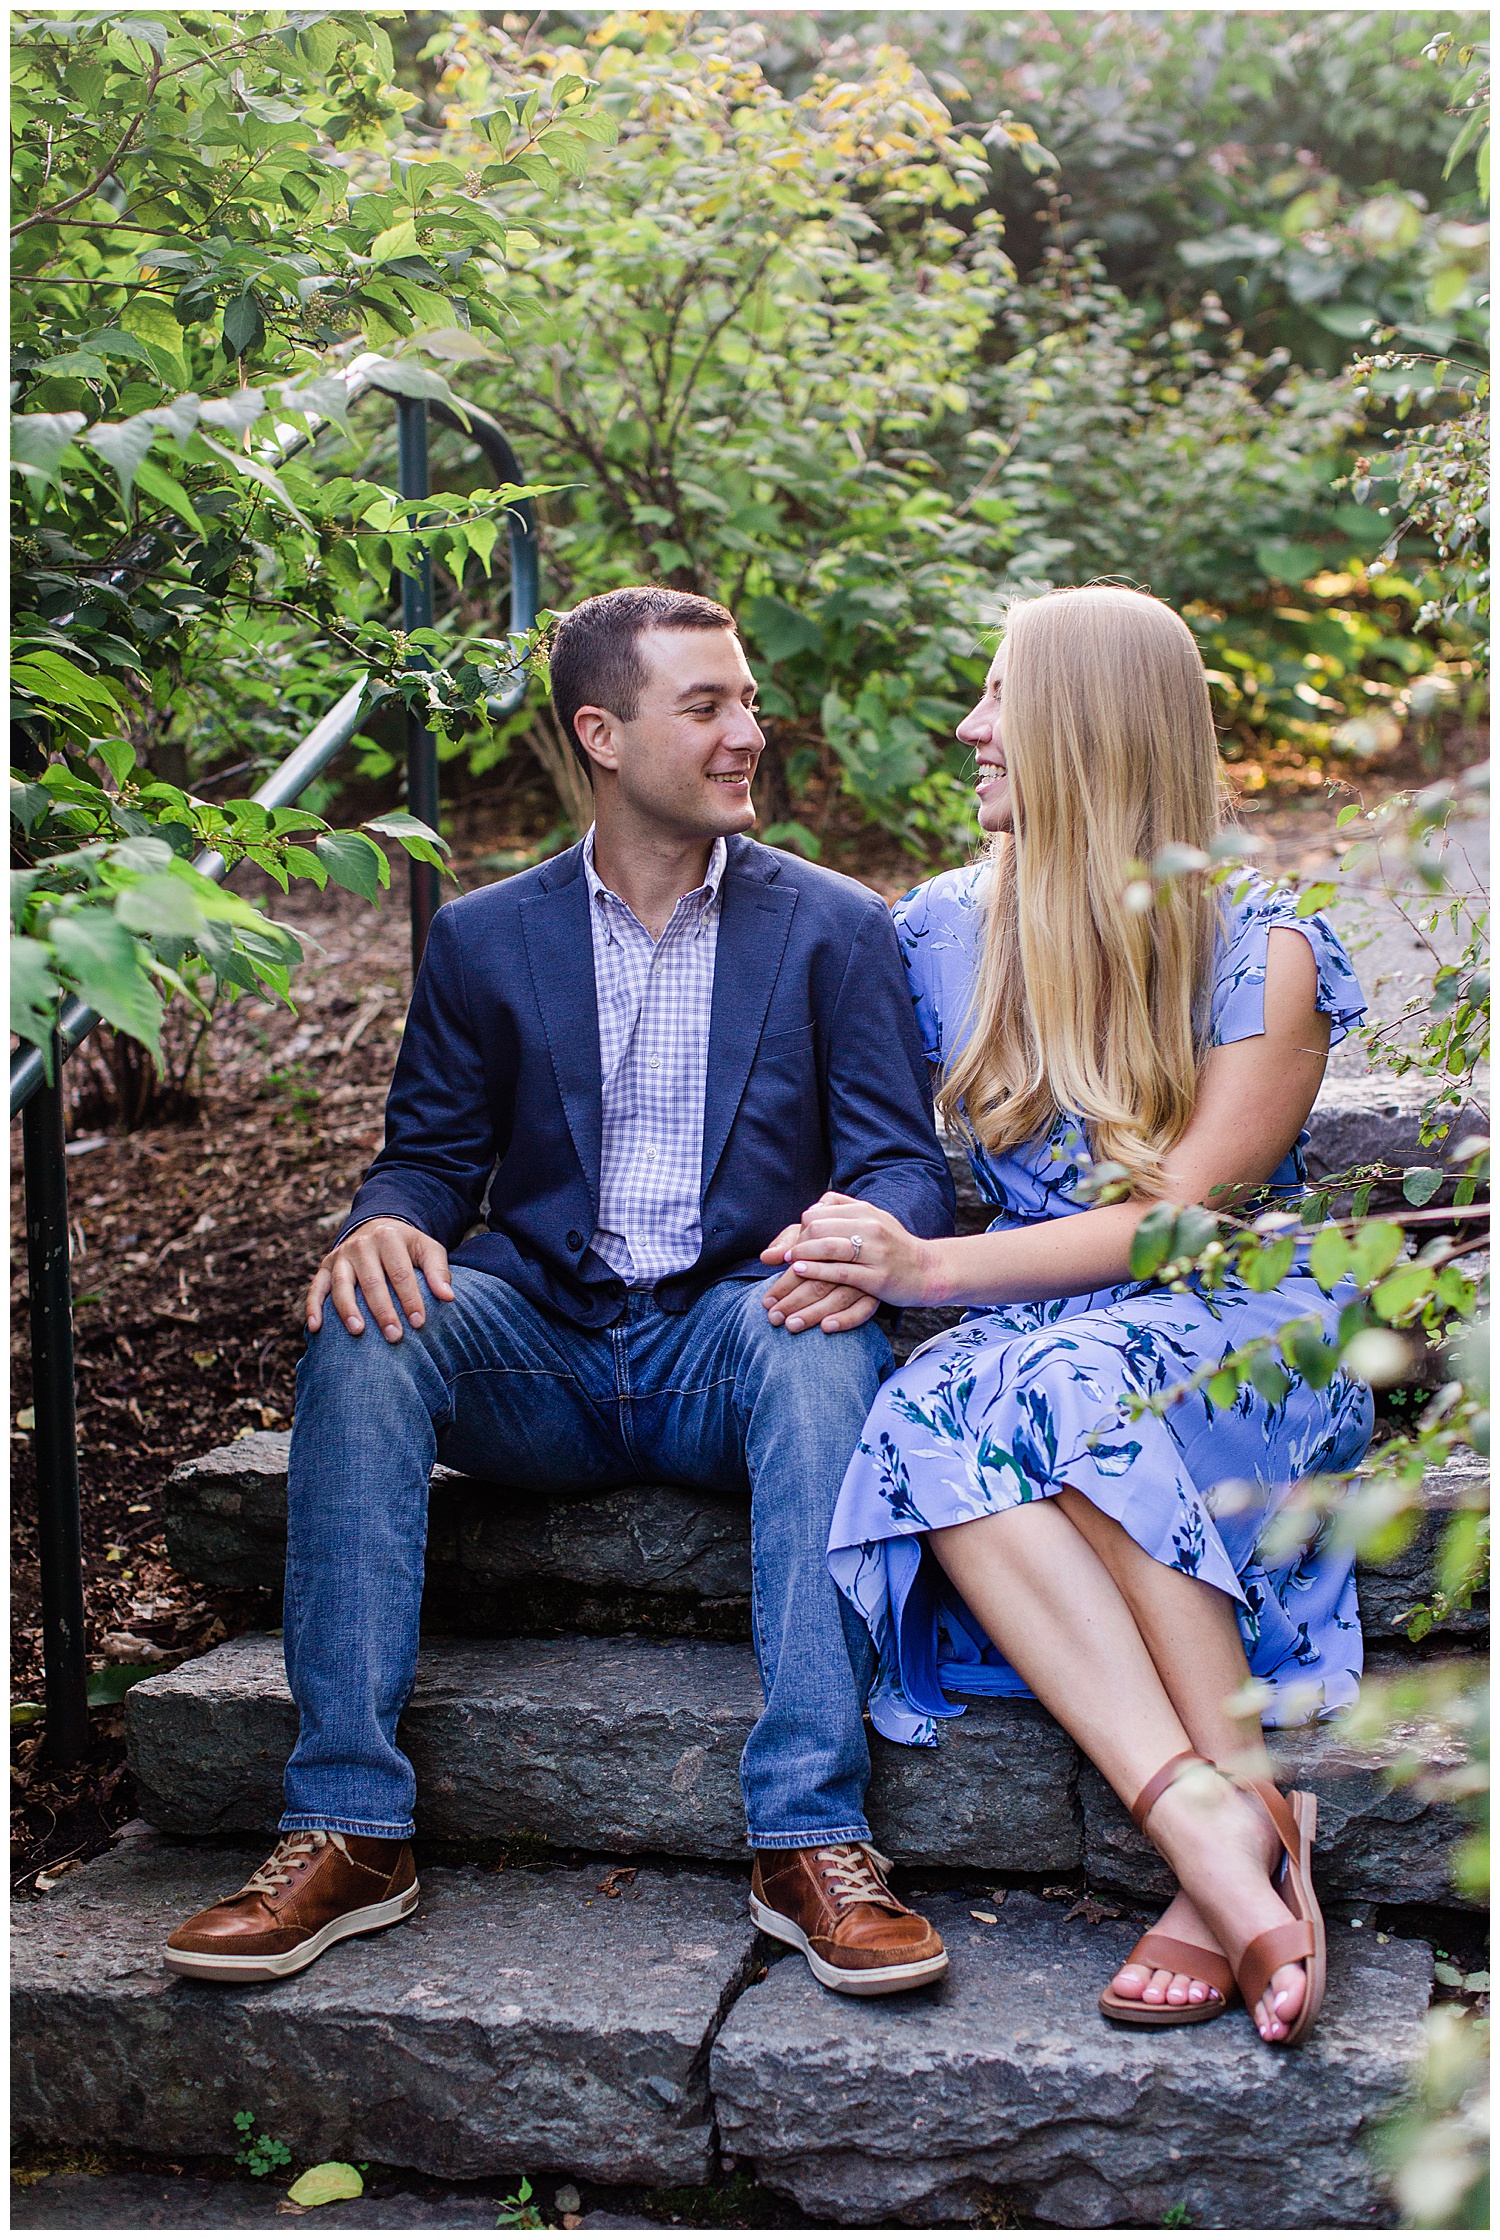 Couple laughs together on stone steps surrounded by greenery